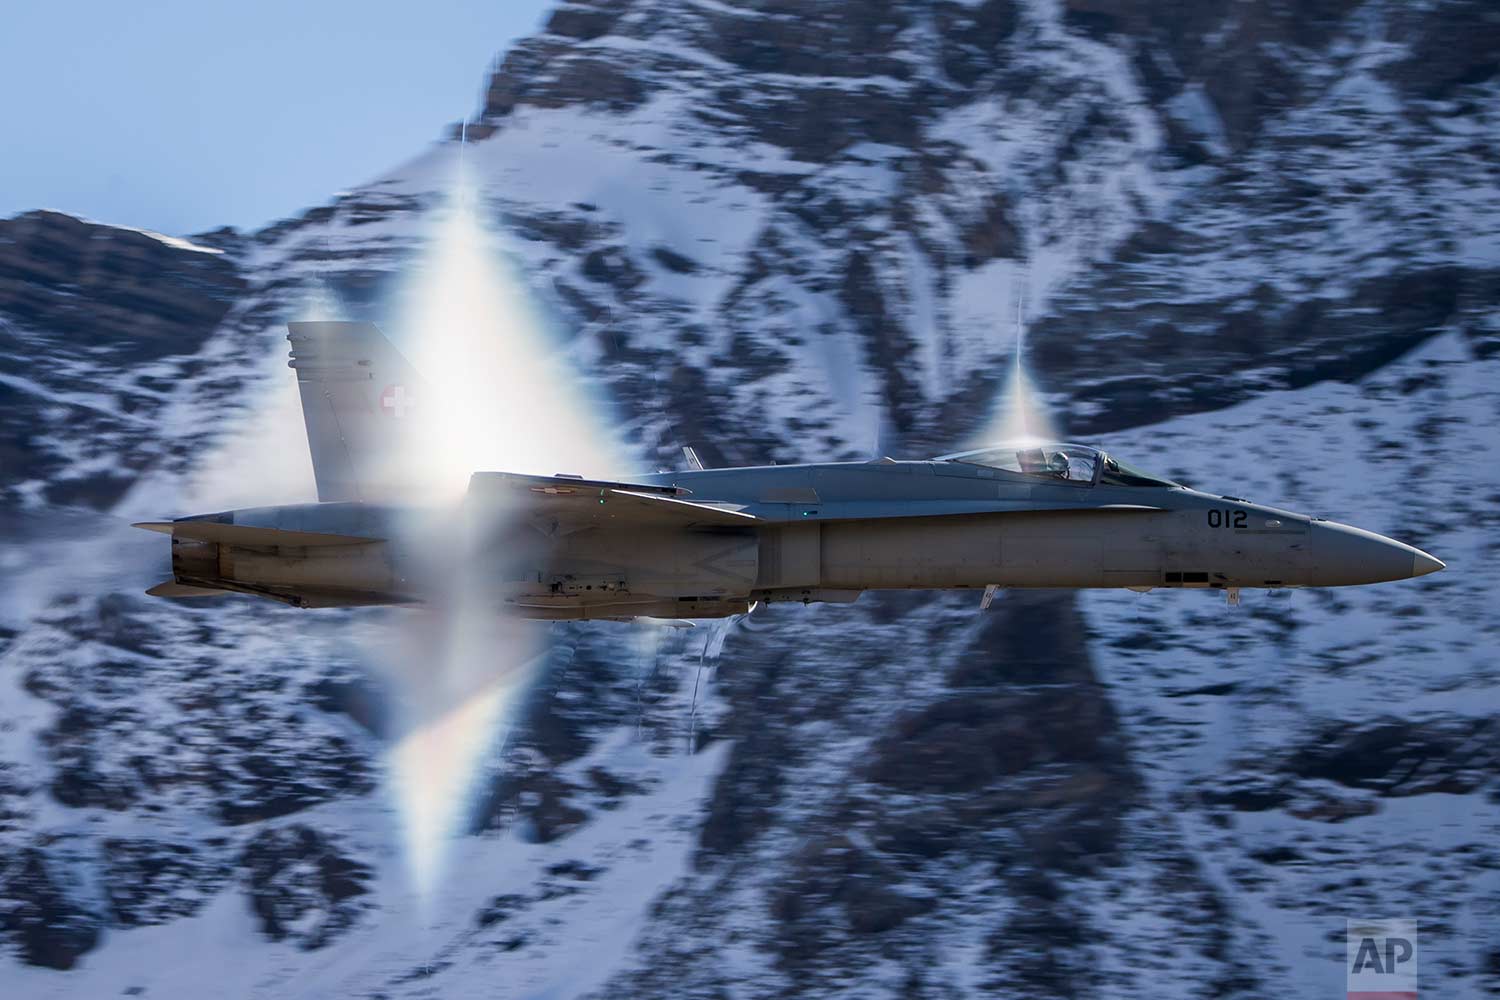  A Swiss Air Force F/A-18 Hornet fighter jet performs a high-speed flyby breaking the sonic barrier as pilots demonstrate their skills in the Swiss Alps above Axalp Ebenfluh on Tuesday, Oct. 10, 2017.(Christian Merz/Keystone via AP) 